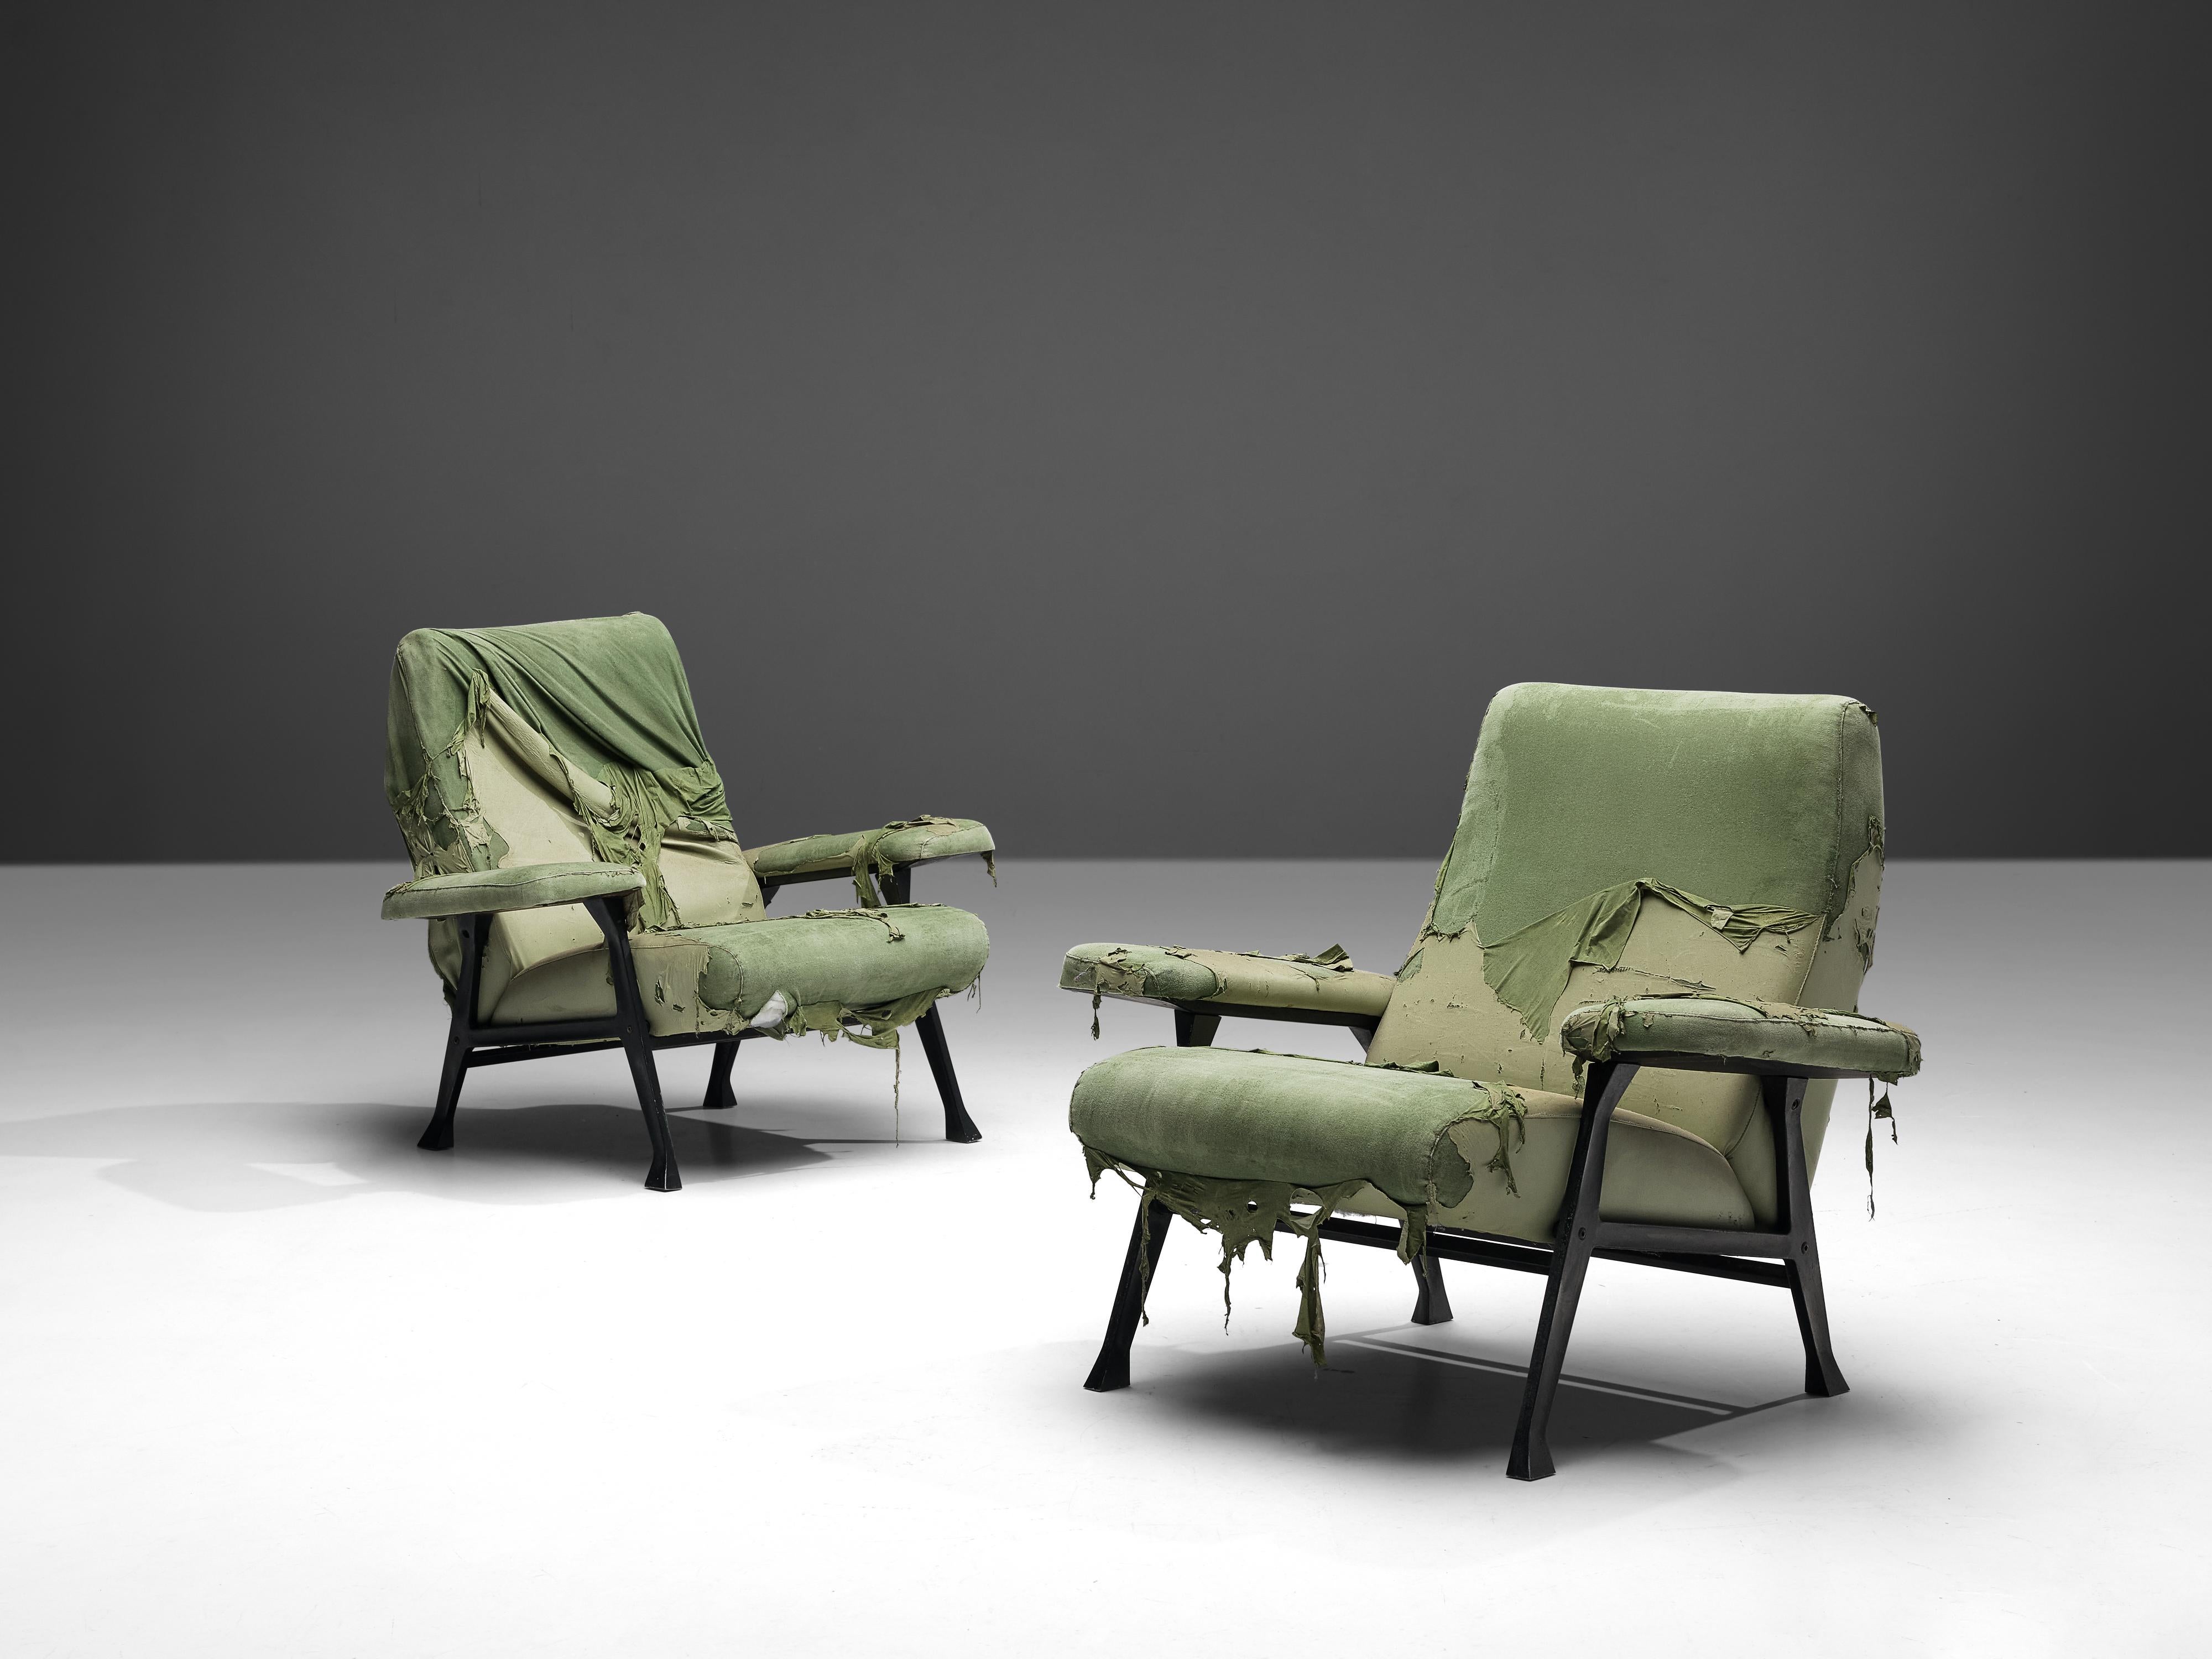 Roberto Menghi for Arflex, pair of ‘Hall’ lounge chairs, metal, fabric, Italy, 1958

In 1958, Roberto Menghi designs an interesting series of armchairs and sofas for Arflex. The designer titled the designs as the ‘Hall’ collection. A year later,